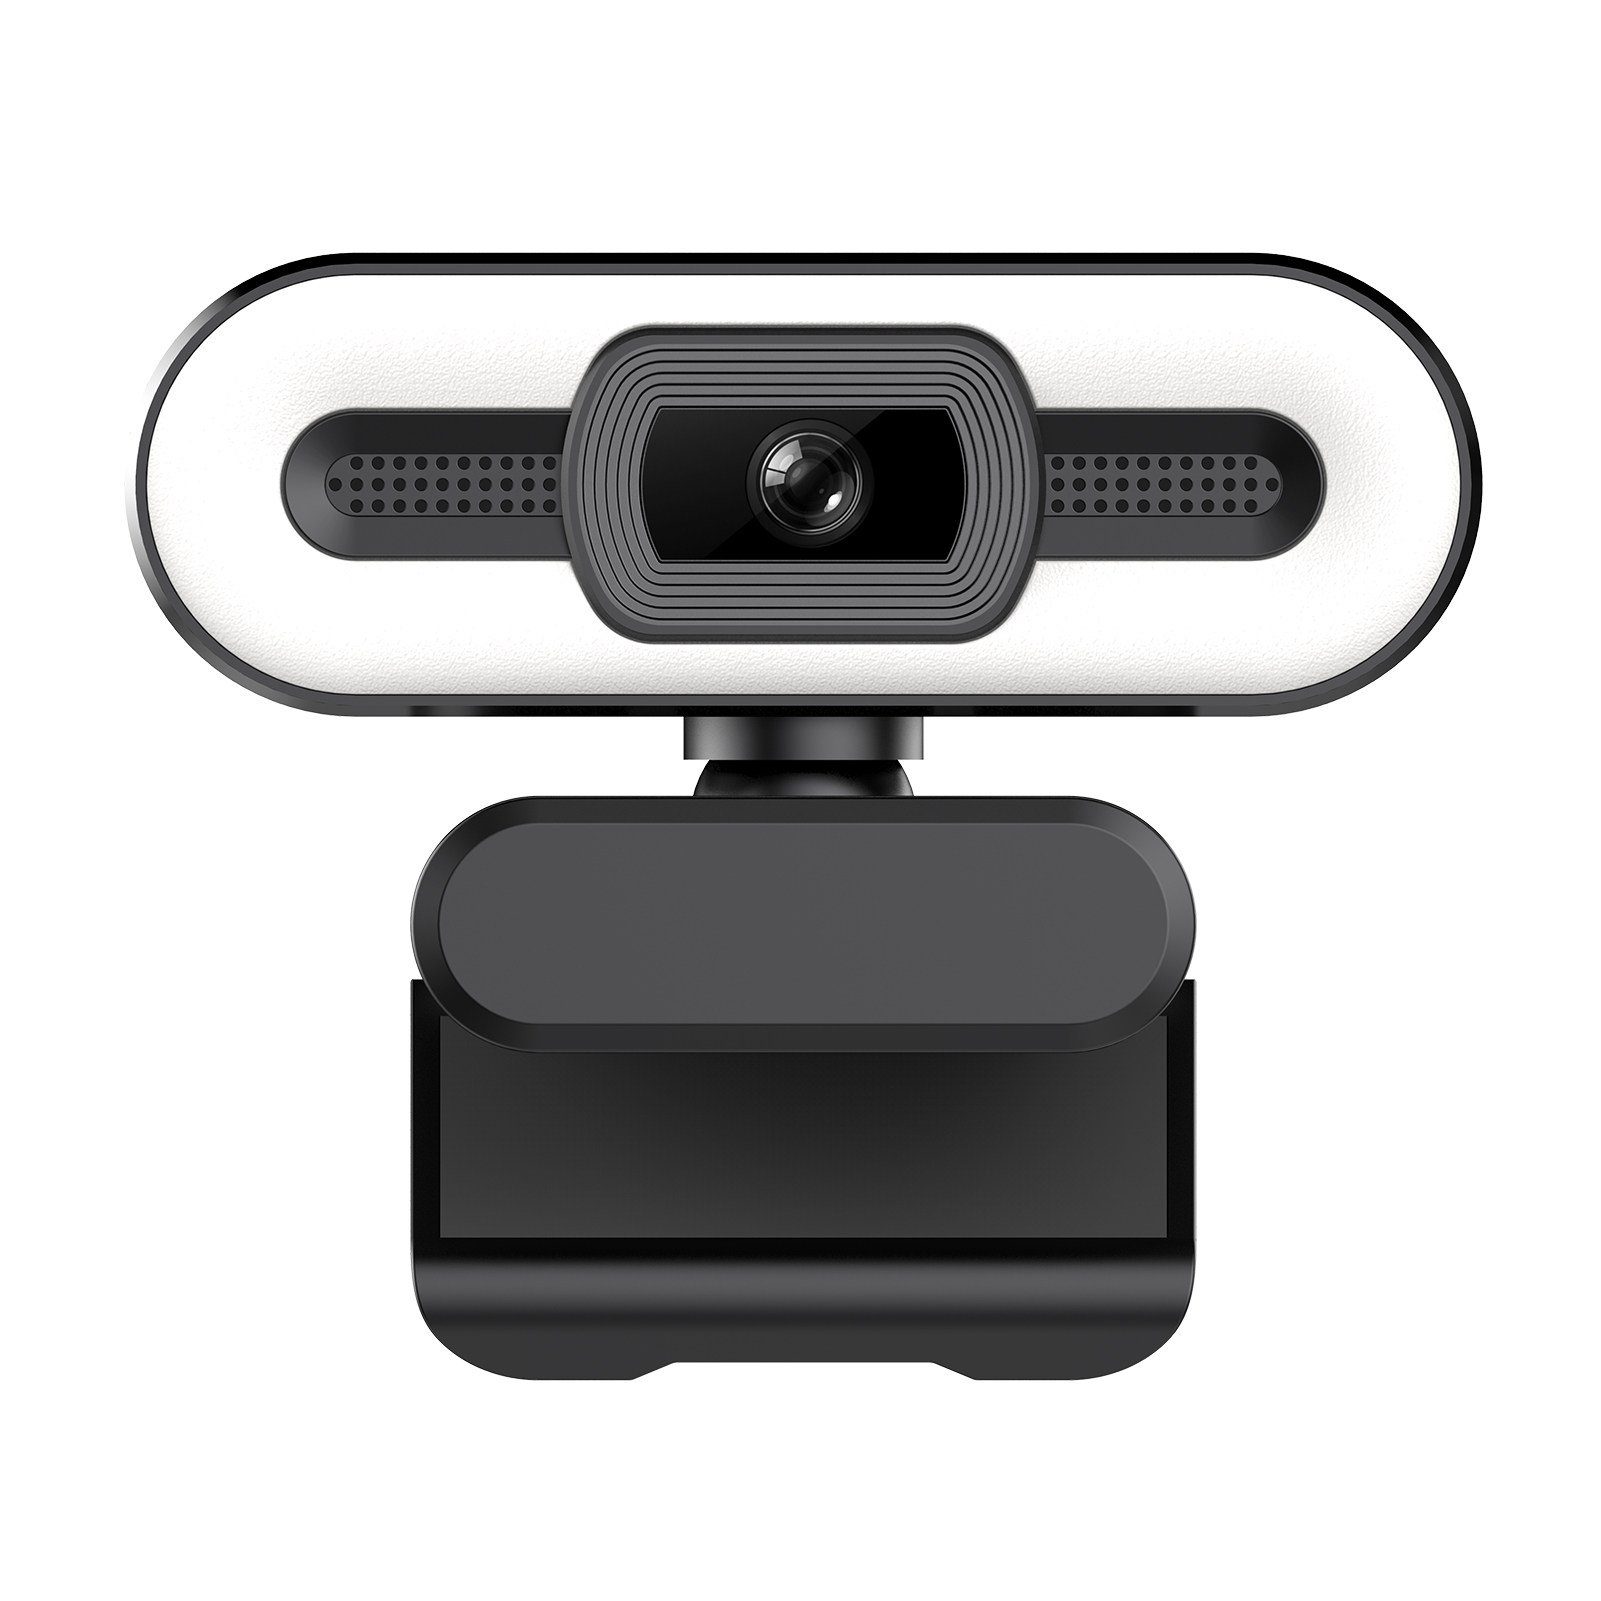 Carevas 4K USB Plug and Play Webcam with Built-in Microphone Lighting for Live Stream Video Call Video Conference Online Teaching - image 1 of 3